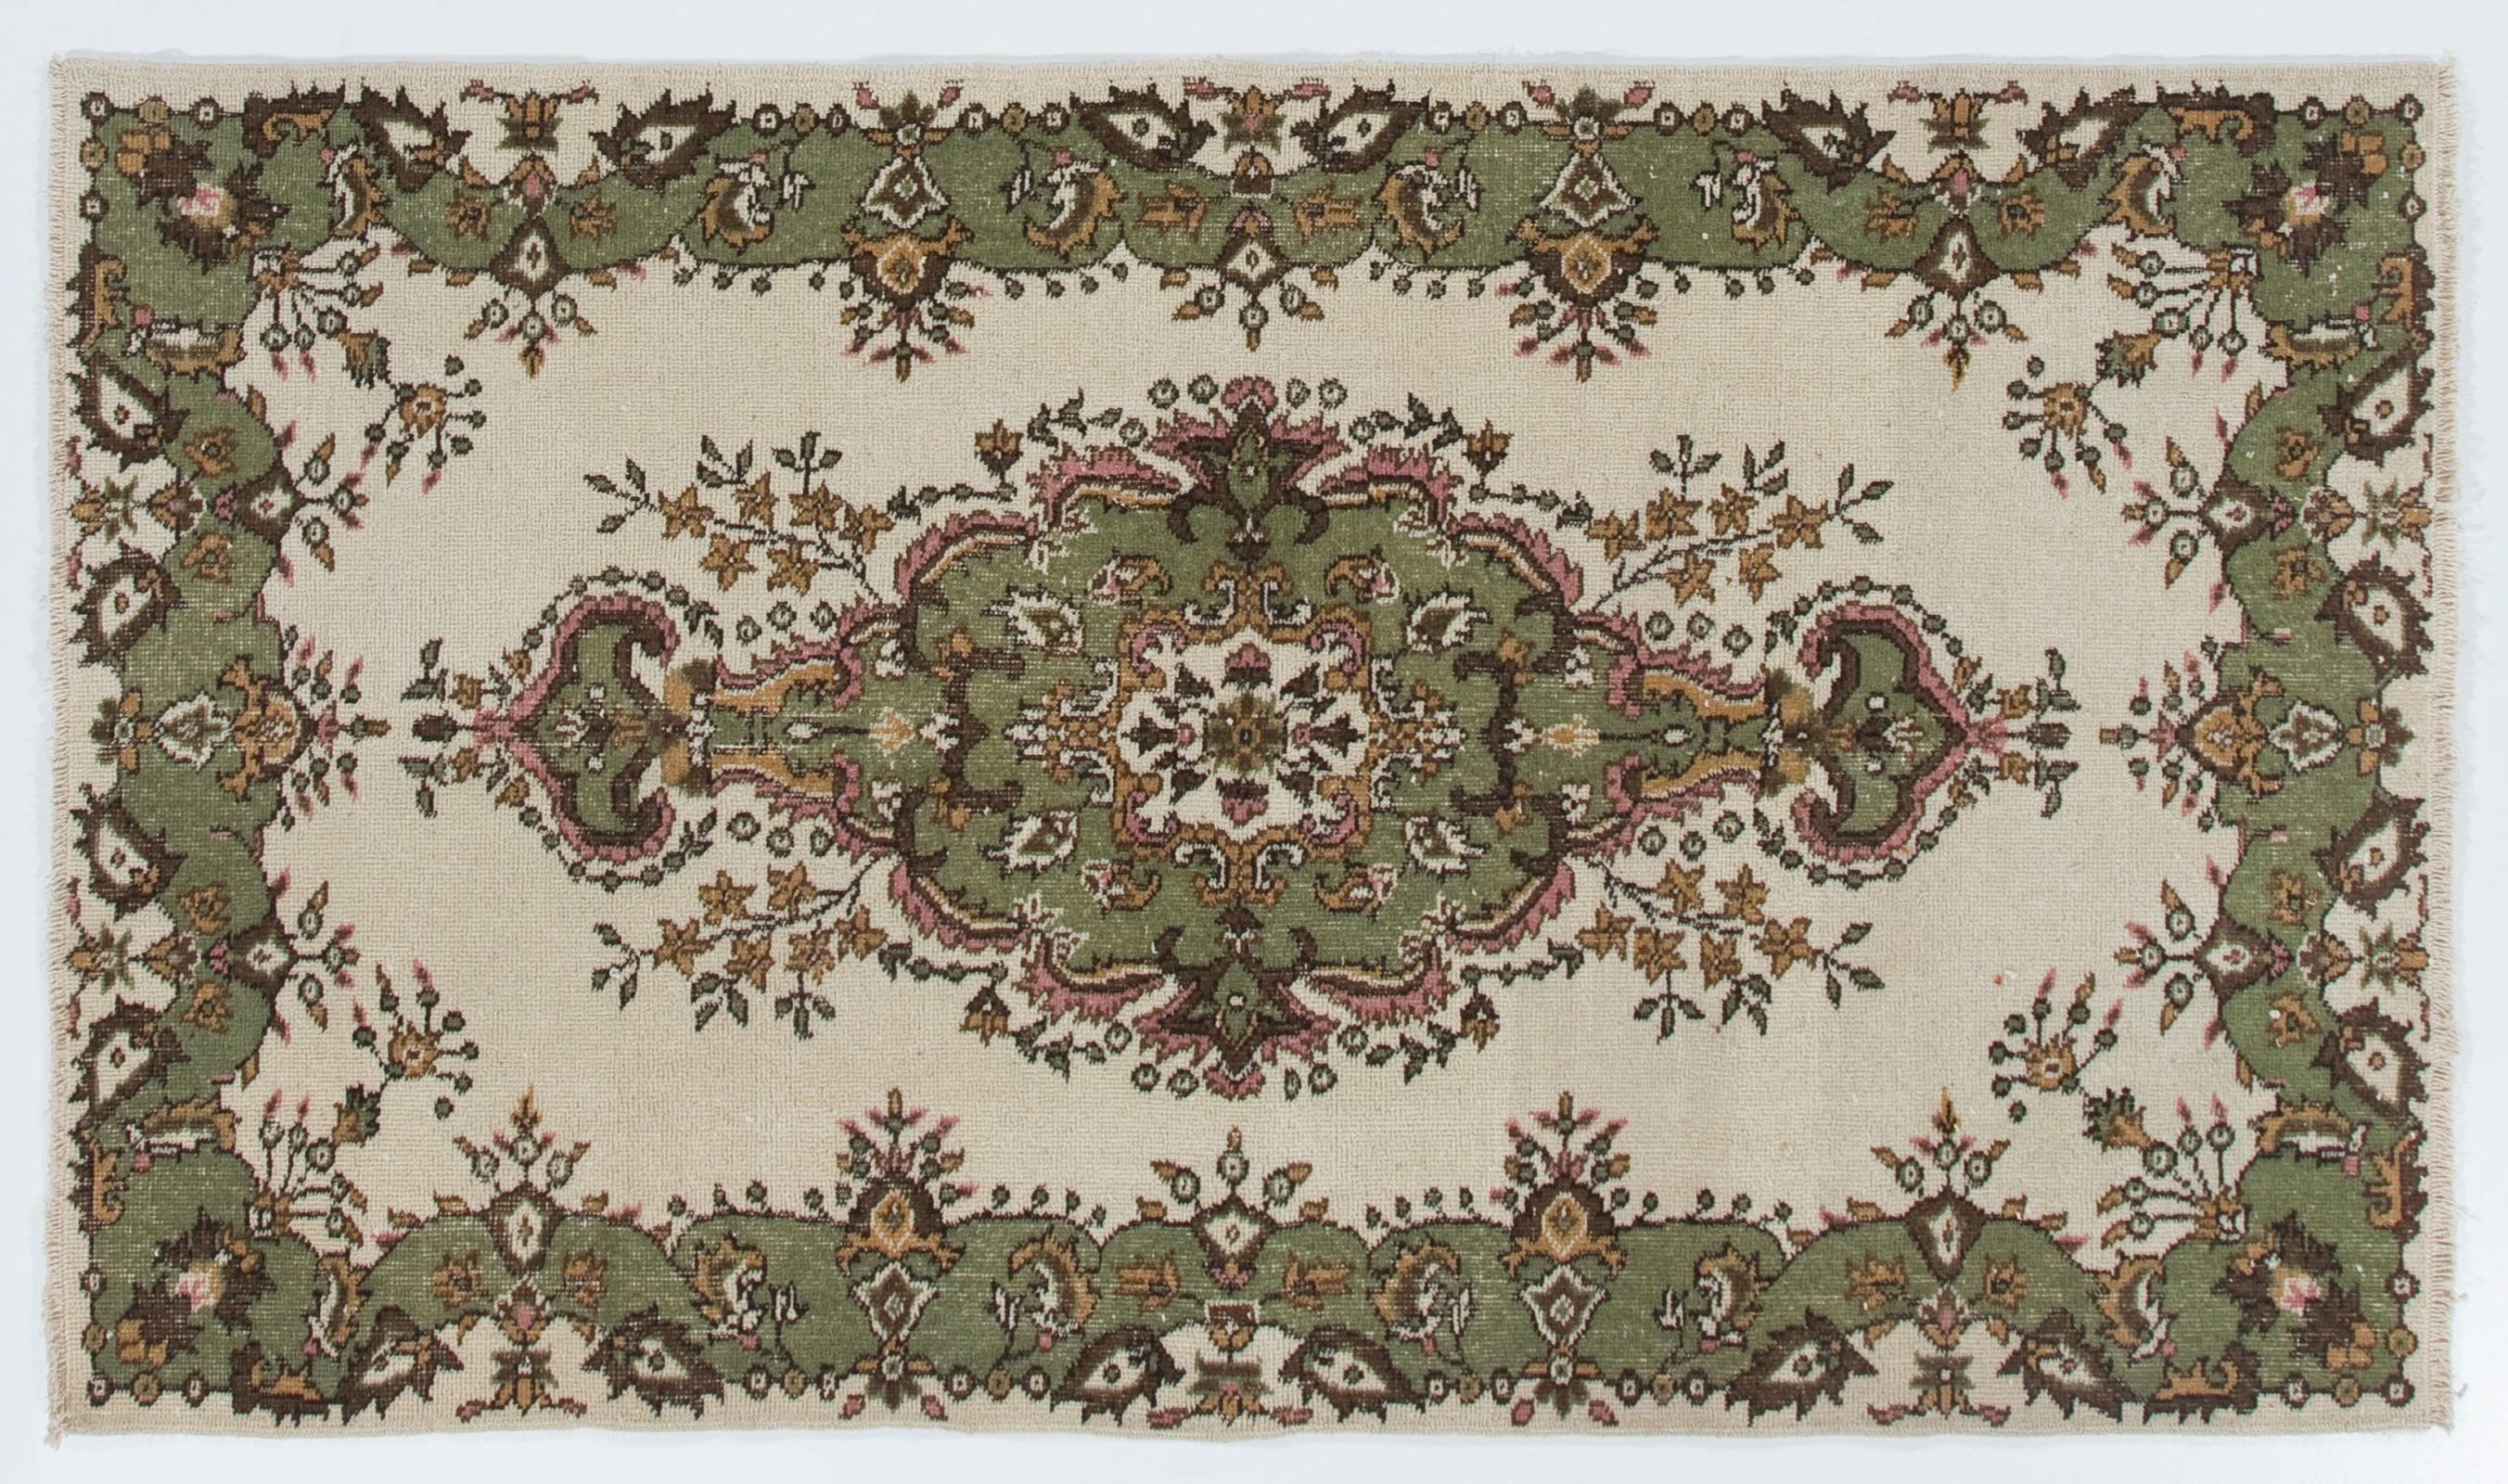 4x7 Ft Handmade Vintage Oushak Accent Rug in Beige, Green, Pink & Orange Colors In Good Condition For Sale In Philadelphia, PA